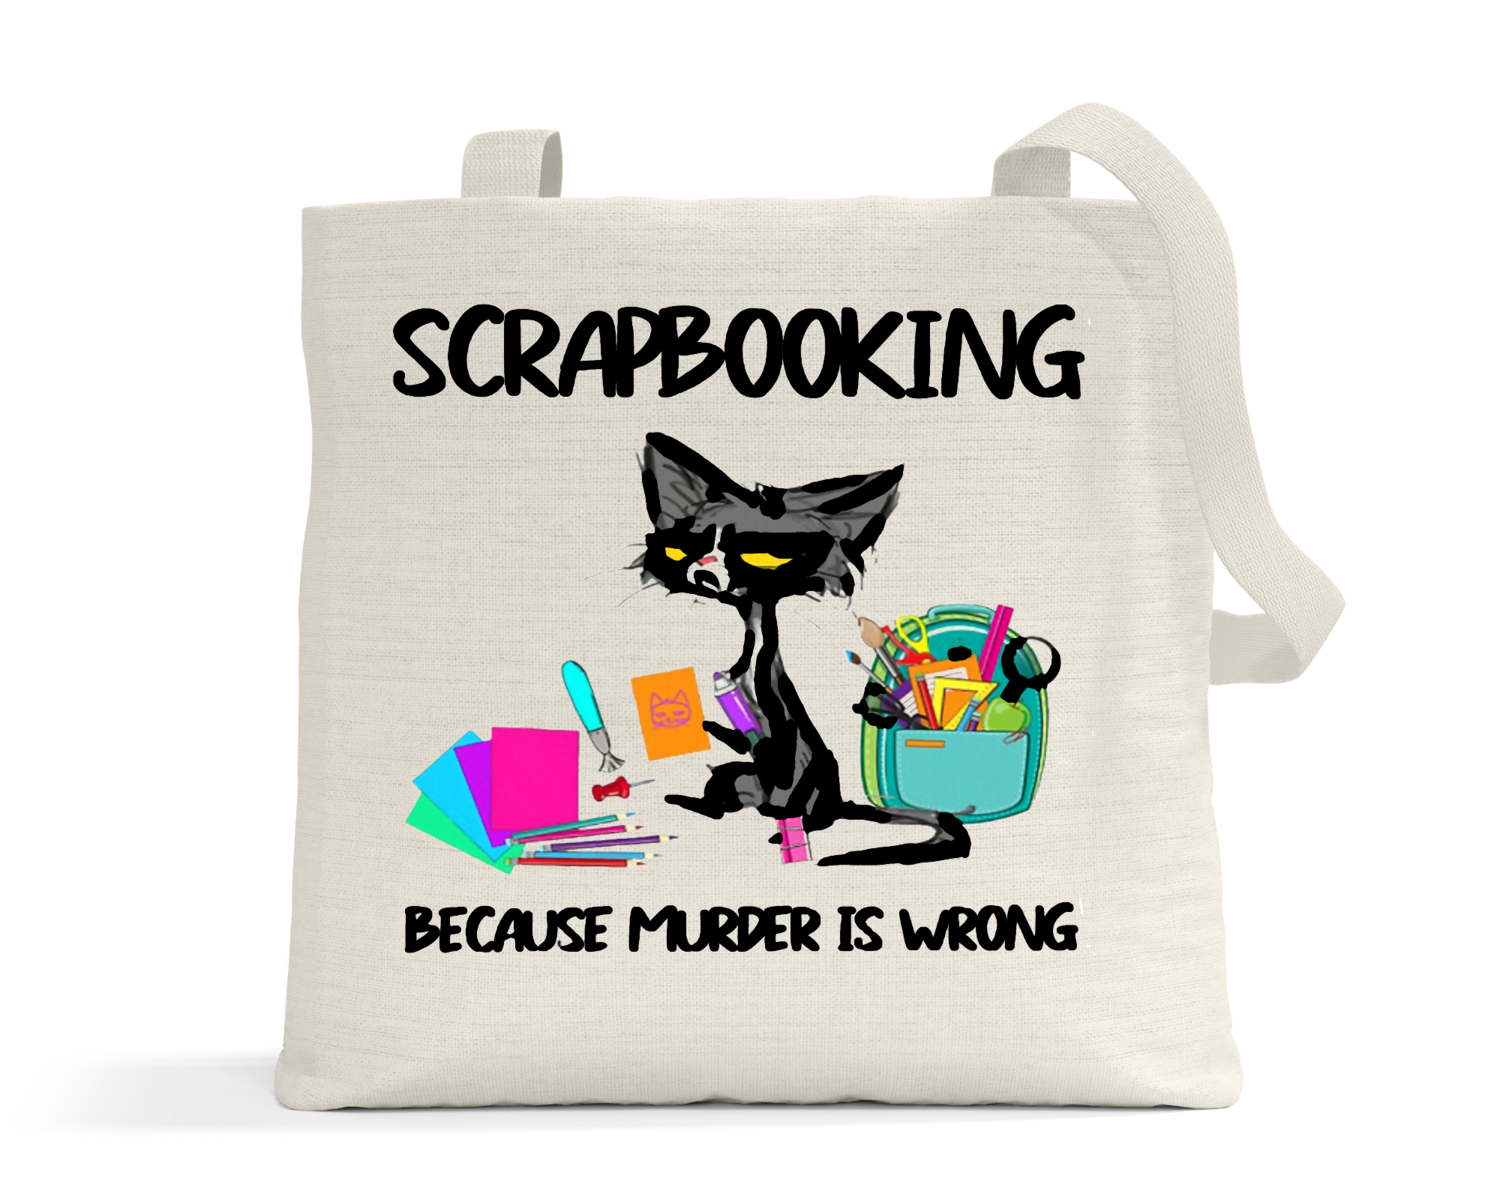 Crafting Tote Bag: I'D RATHER BE SCRAPBOOKING BECAUSE MURDER IS WRONG